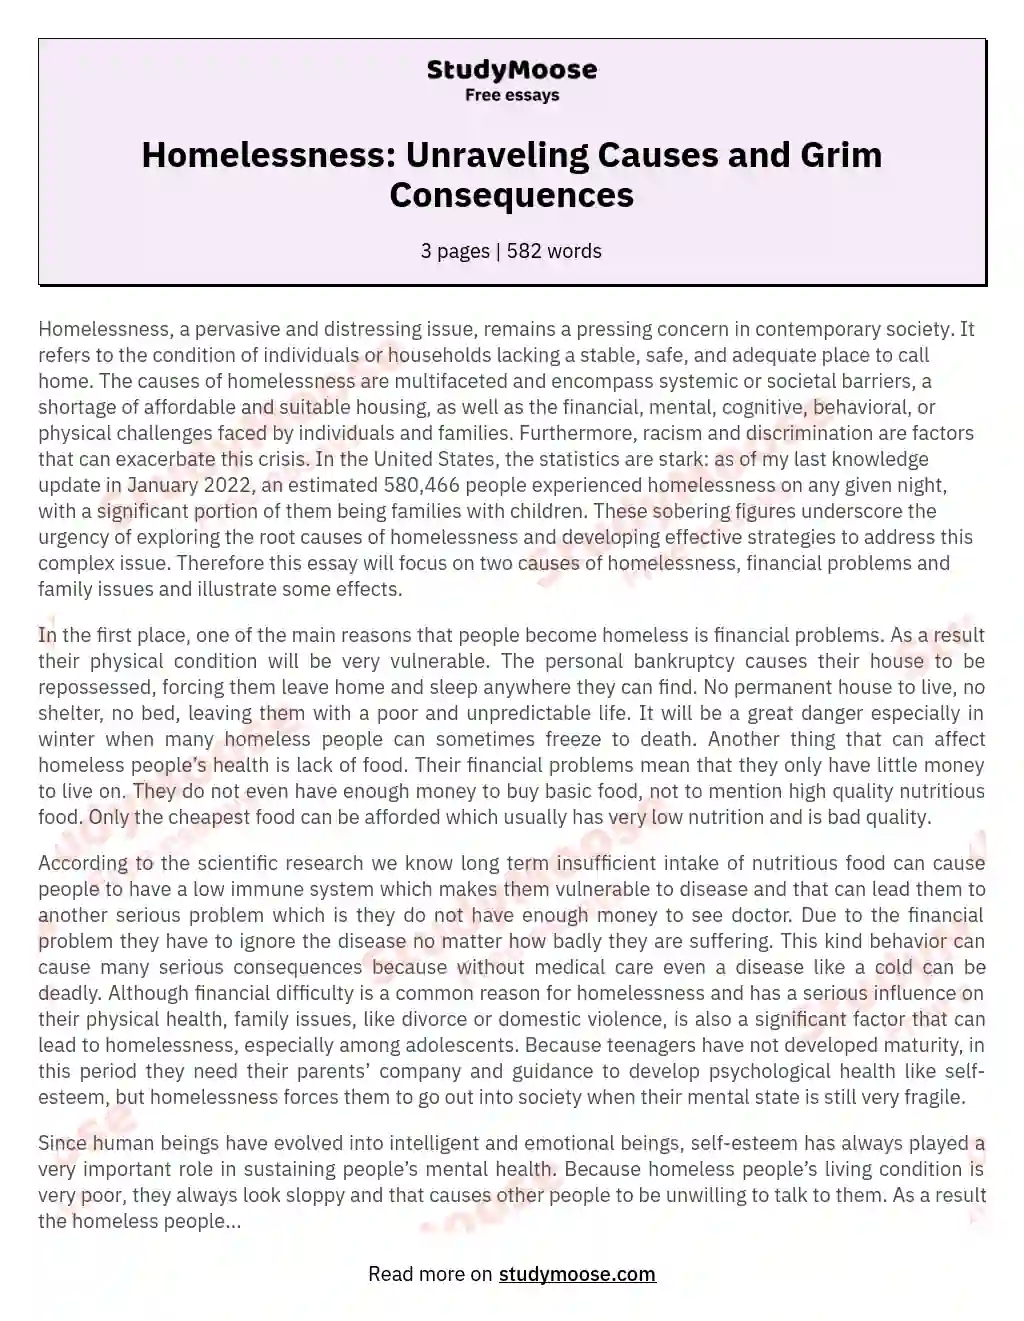 Homelessness: Unraveling Causes and Grim Consequences essay